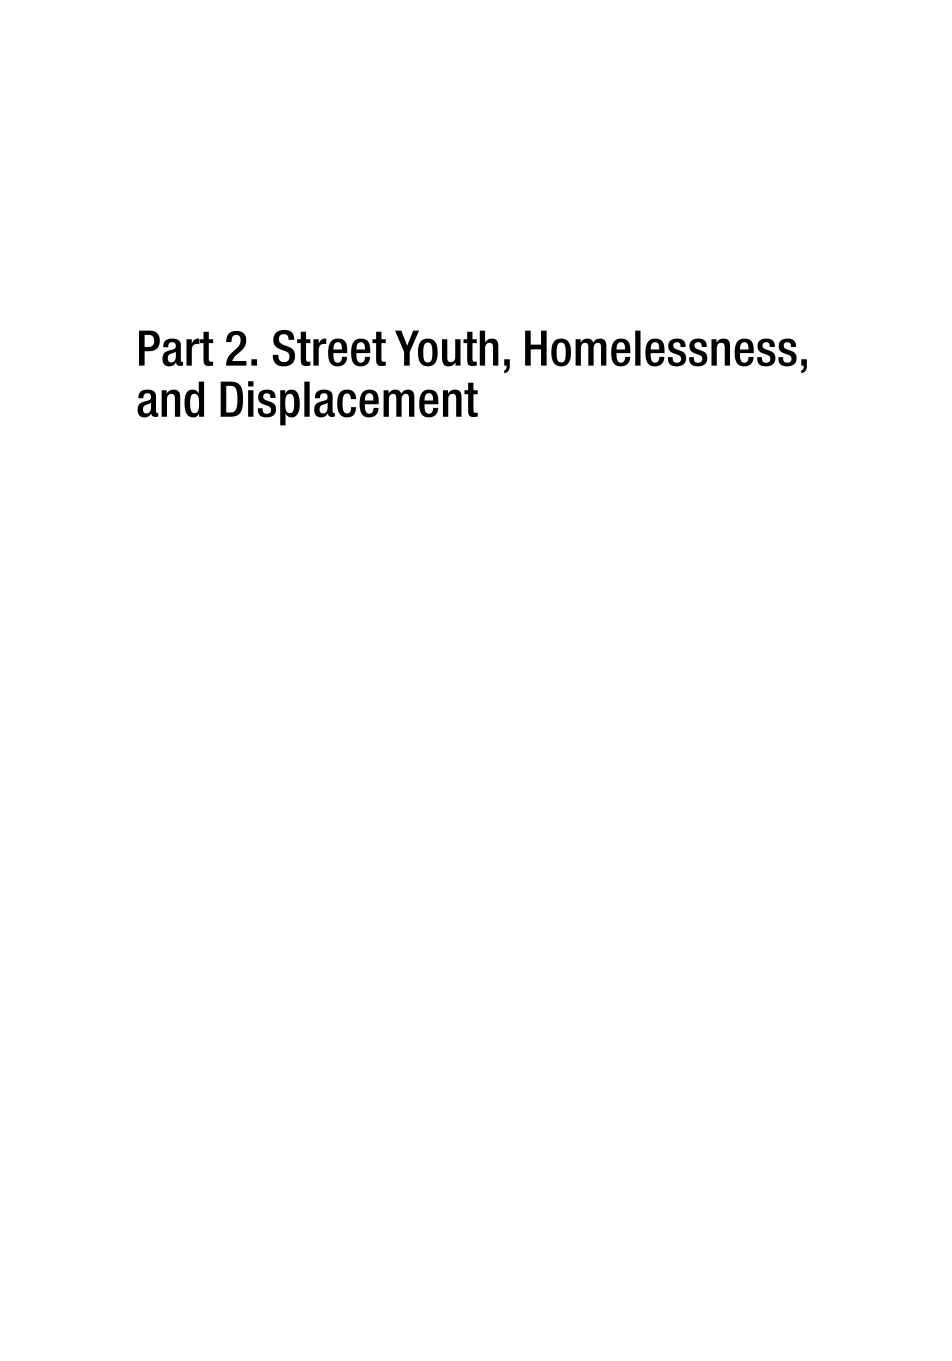 Globalizing the Streets: Cross-Cultural Perspectives on Youth, Social Control, and Empowerment page 45